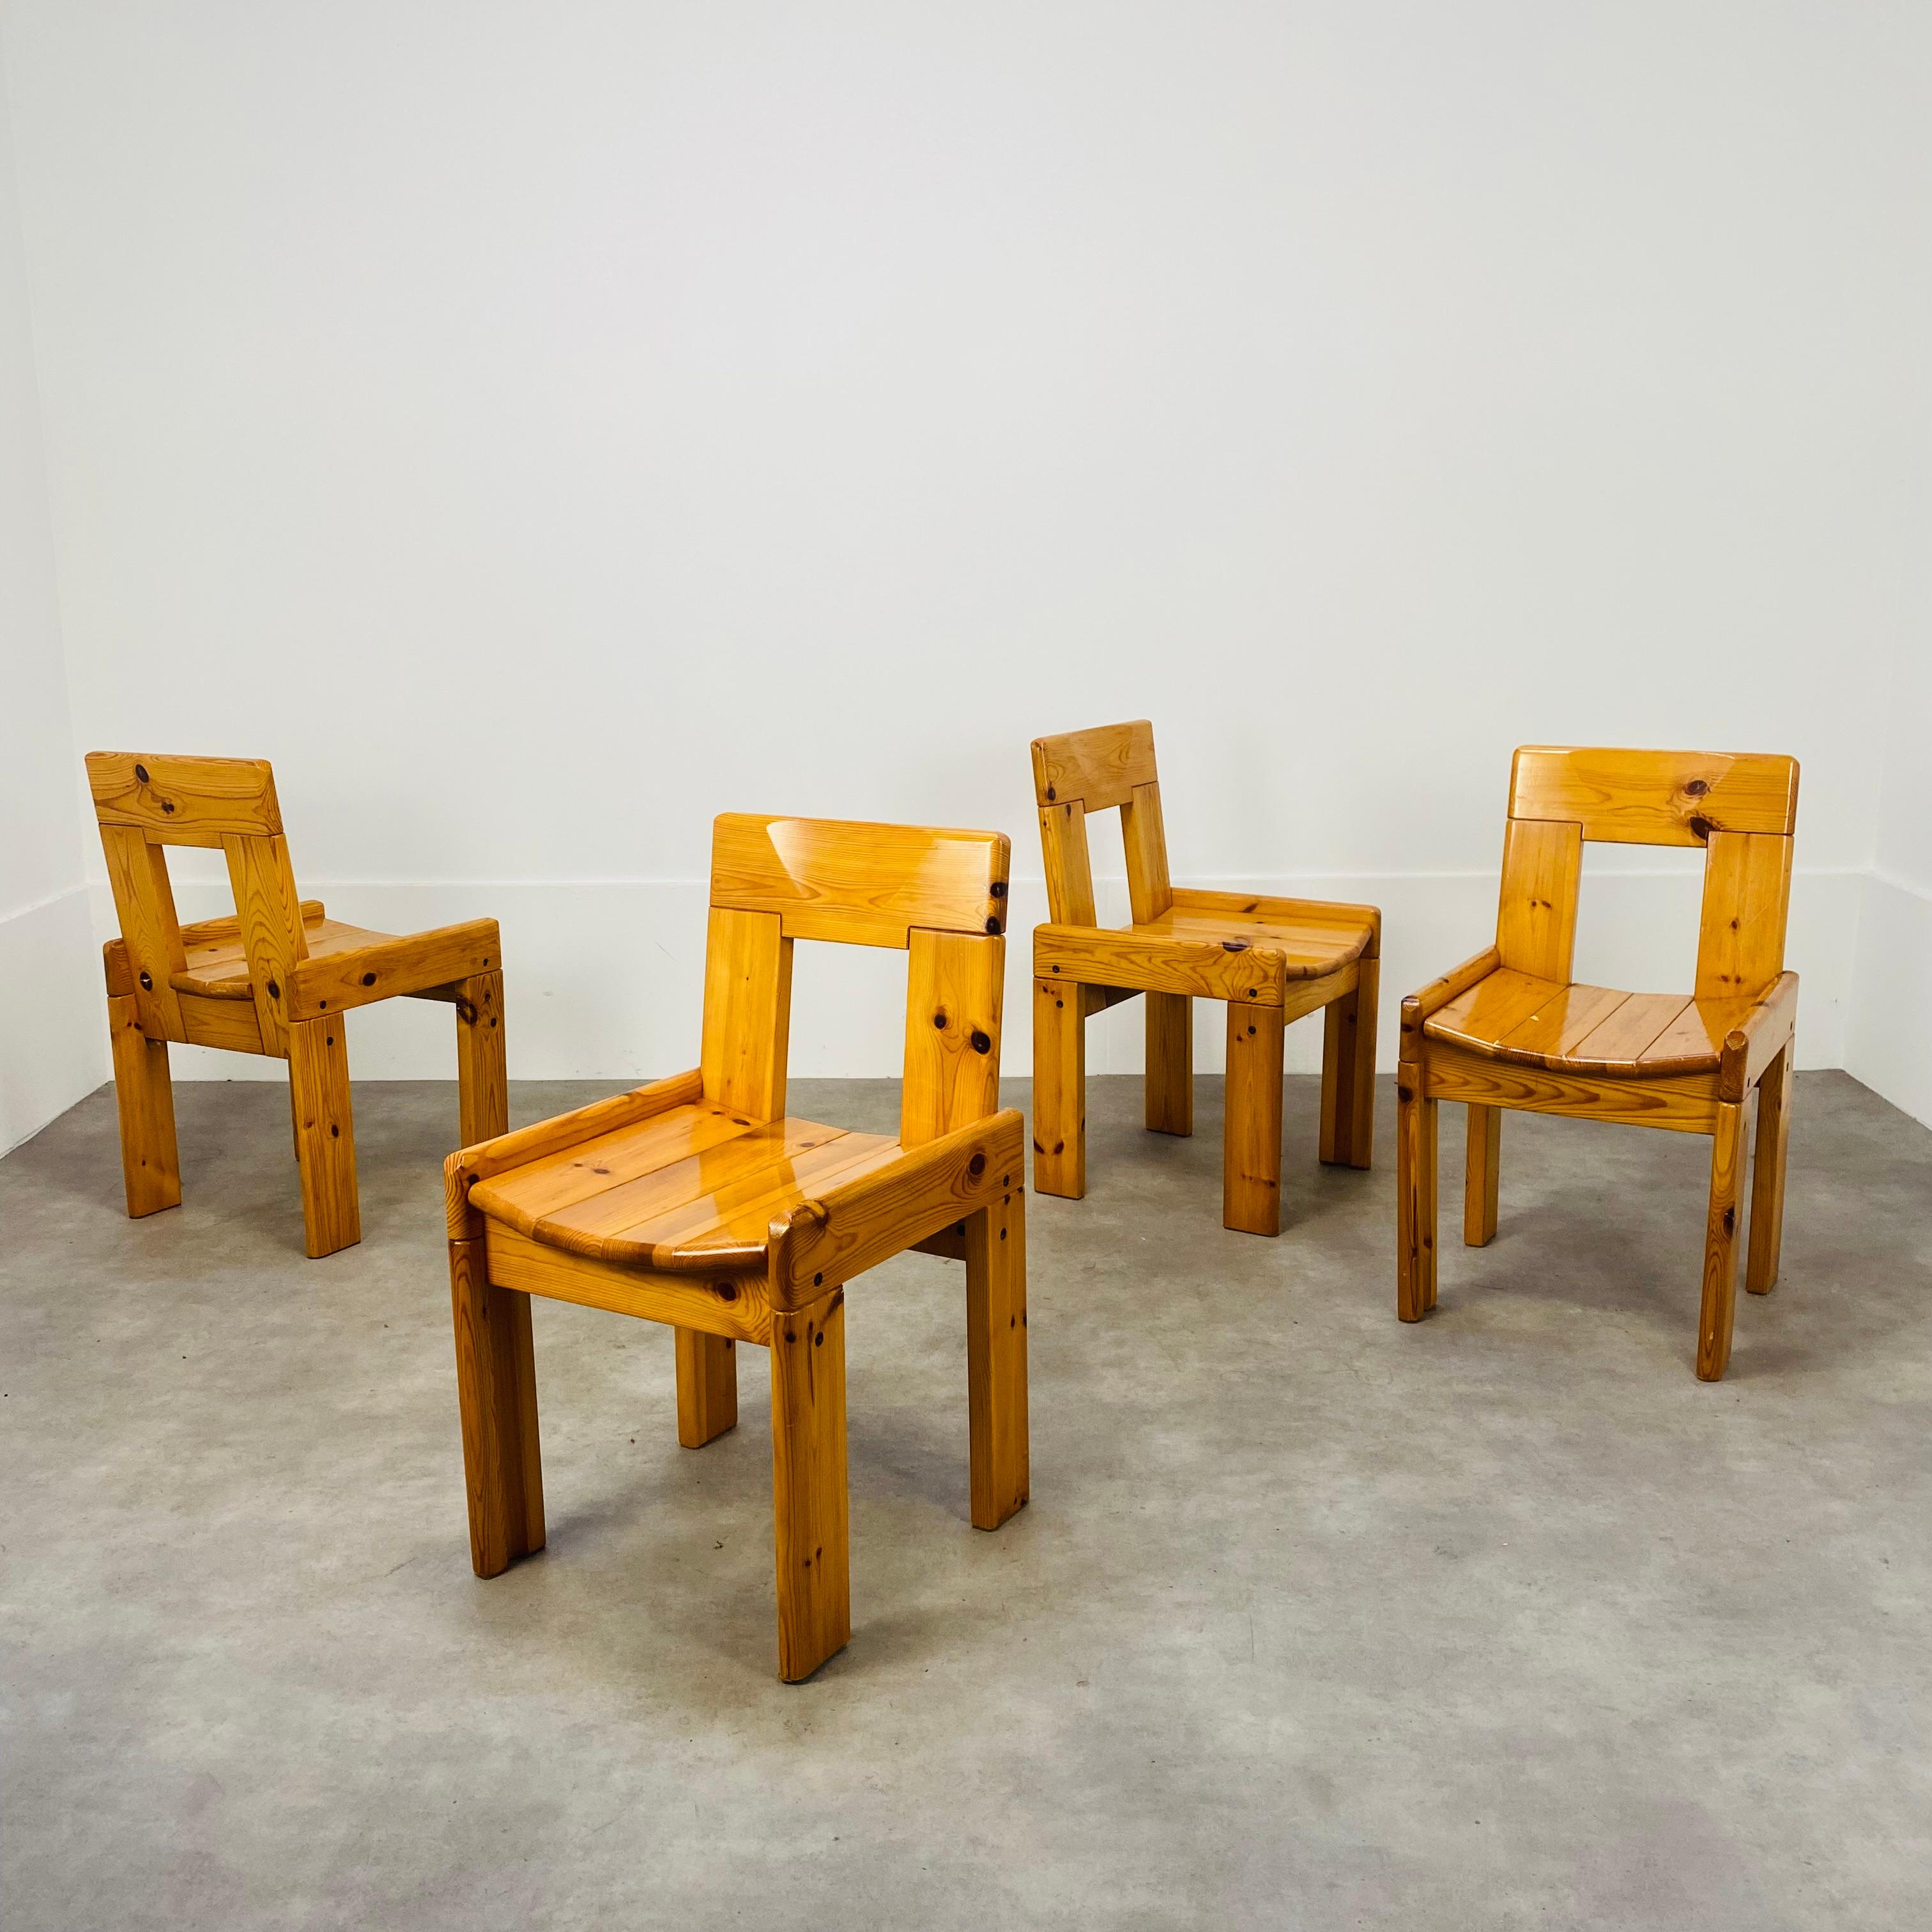 Set of four brutalist chairs designed by Silvio Coppola for Roche Bobois, France, in the 1970's. They're in massive pine wood. 
They're in nice condition, wear consistent with age and use, minor scratches but remains stables and very sturdy.